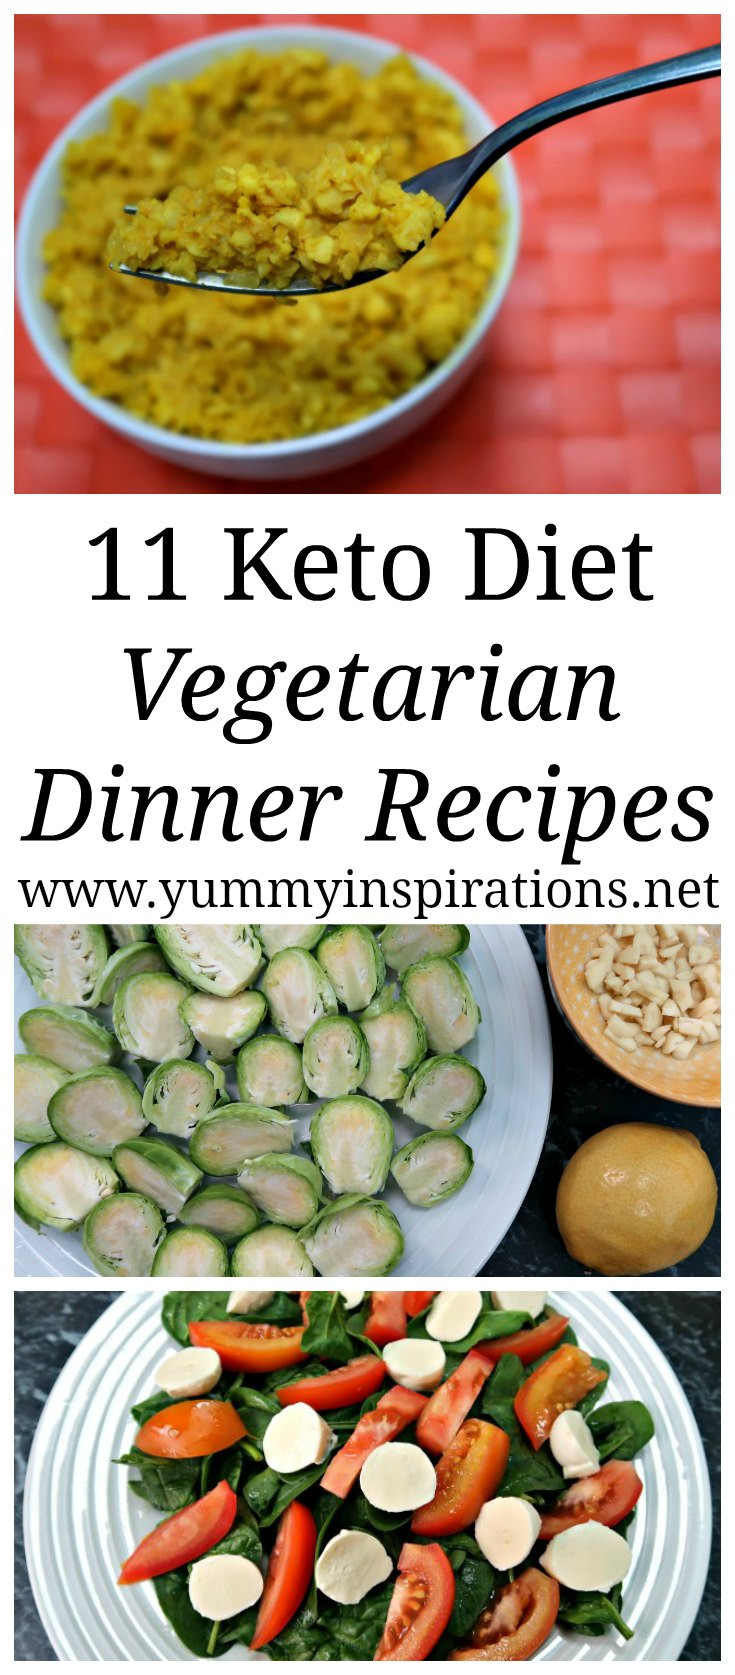 Vegetarian Keto Recipes Dinners
 11 Keto Ve arian Dinner Recipes Easy Low Carb Meal Ideas